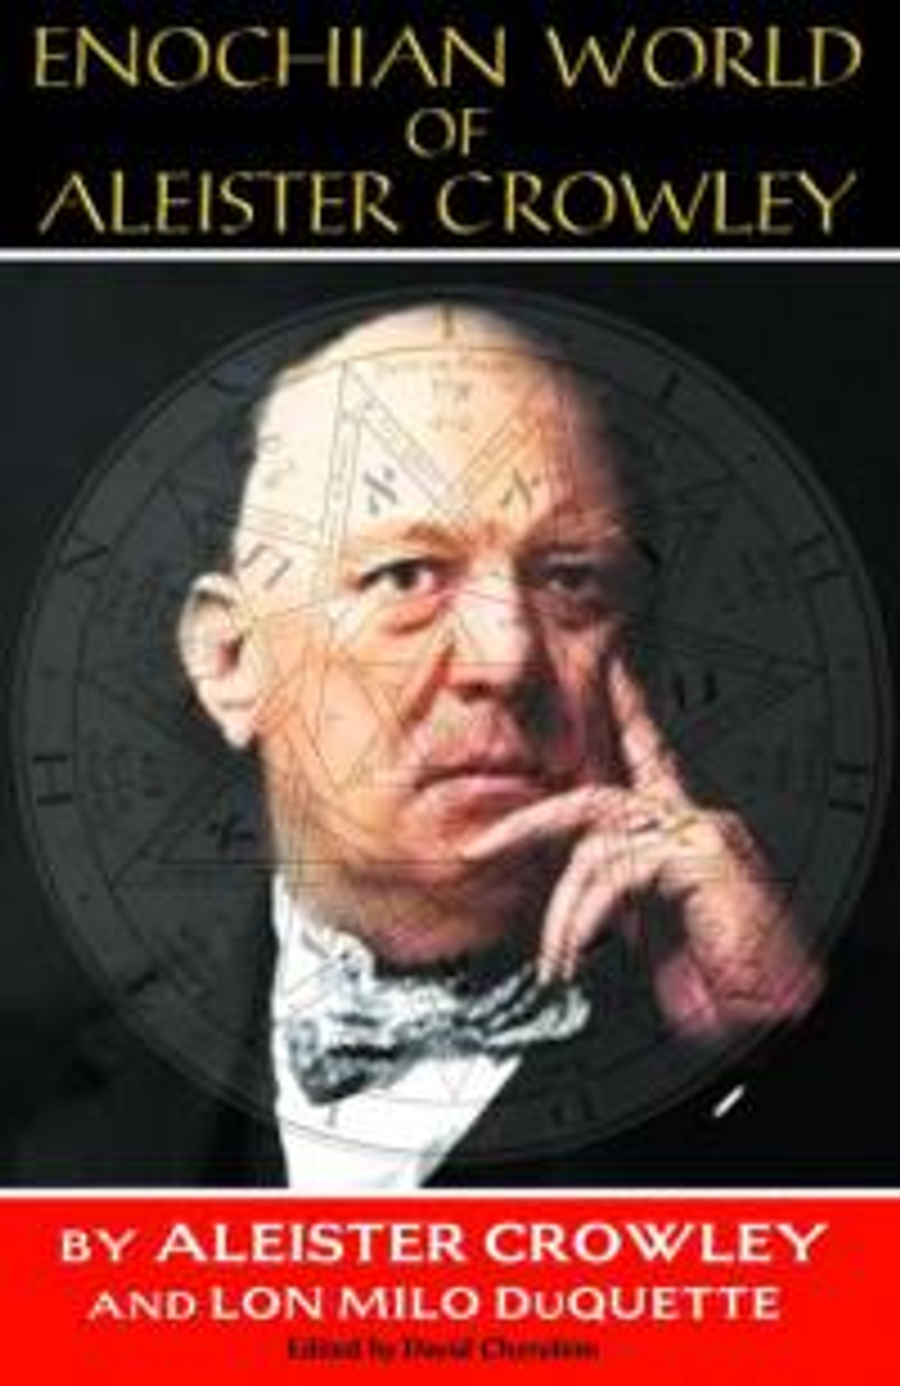 Enochian World of Aleister Crowley by Aleister Crowley